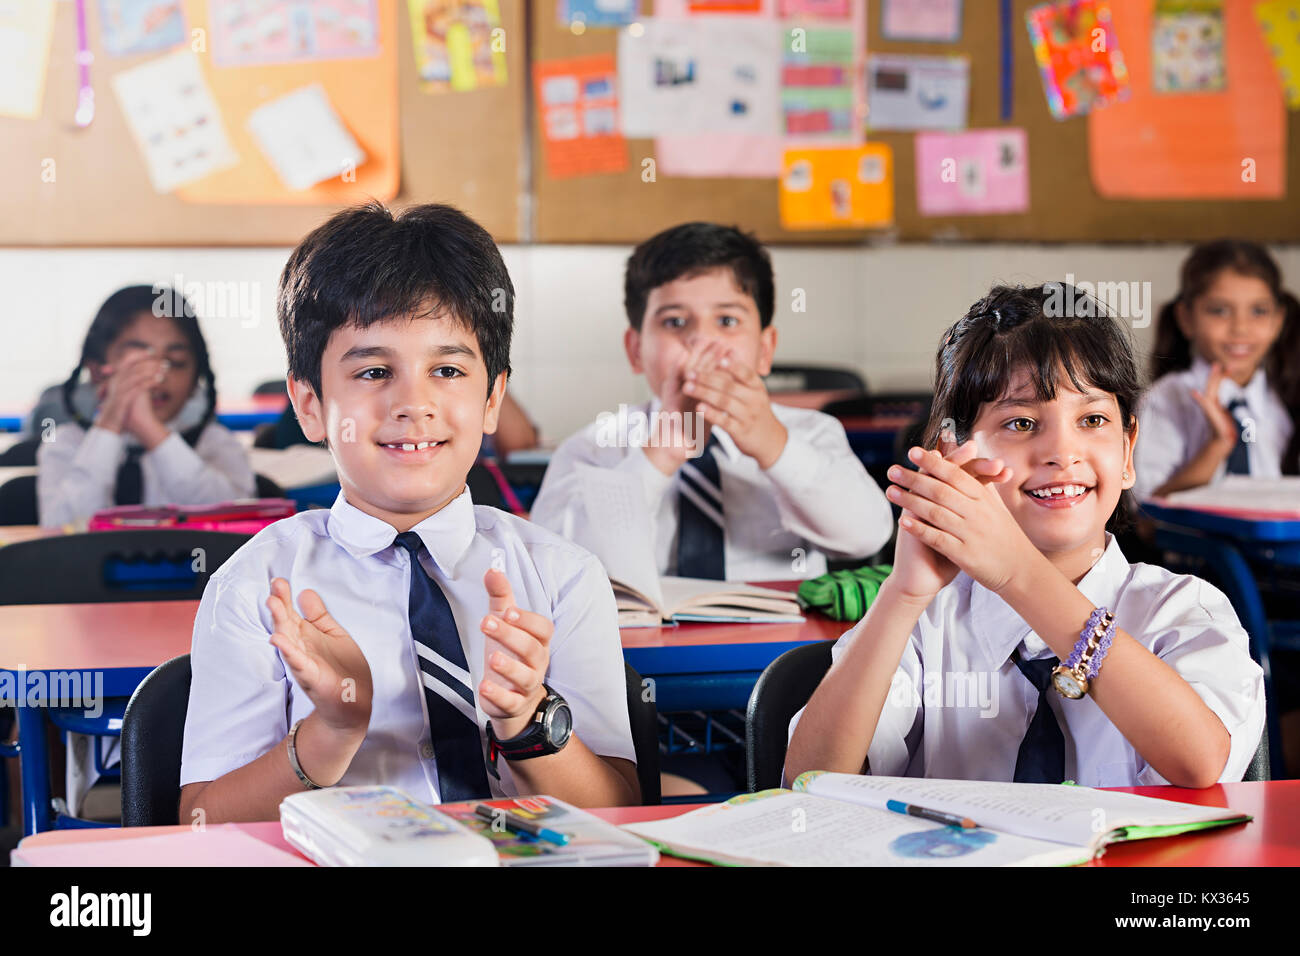 Indian School Kids Students Sitting In Classroom Hands Clapping Stock Photo